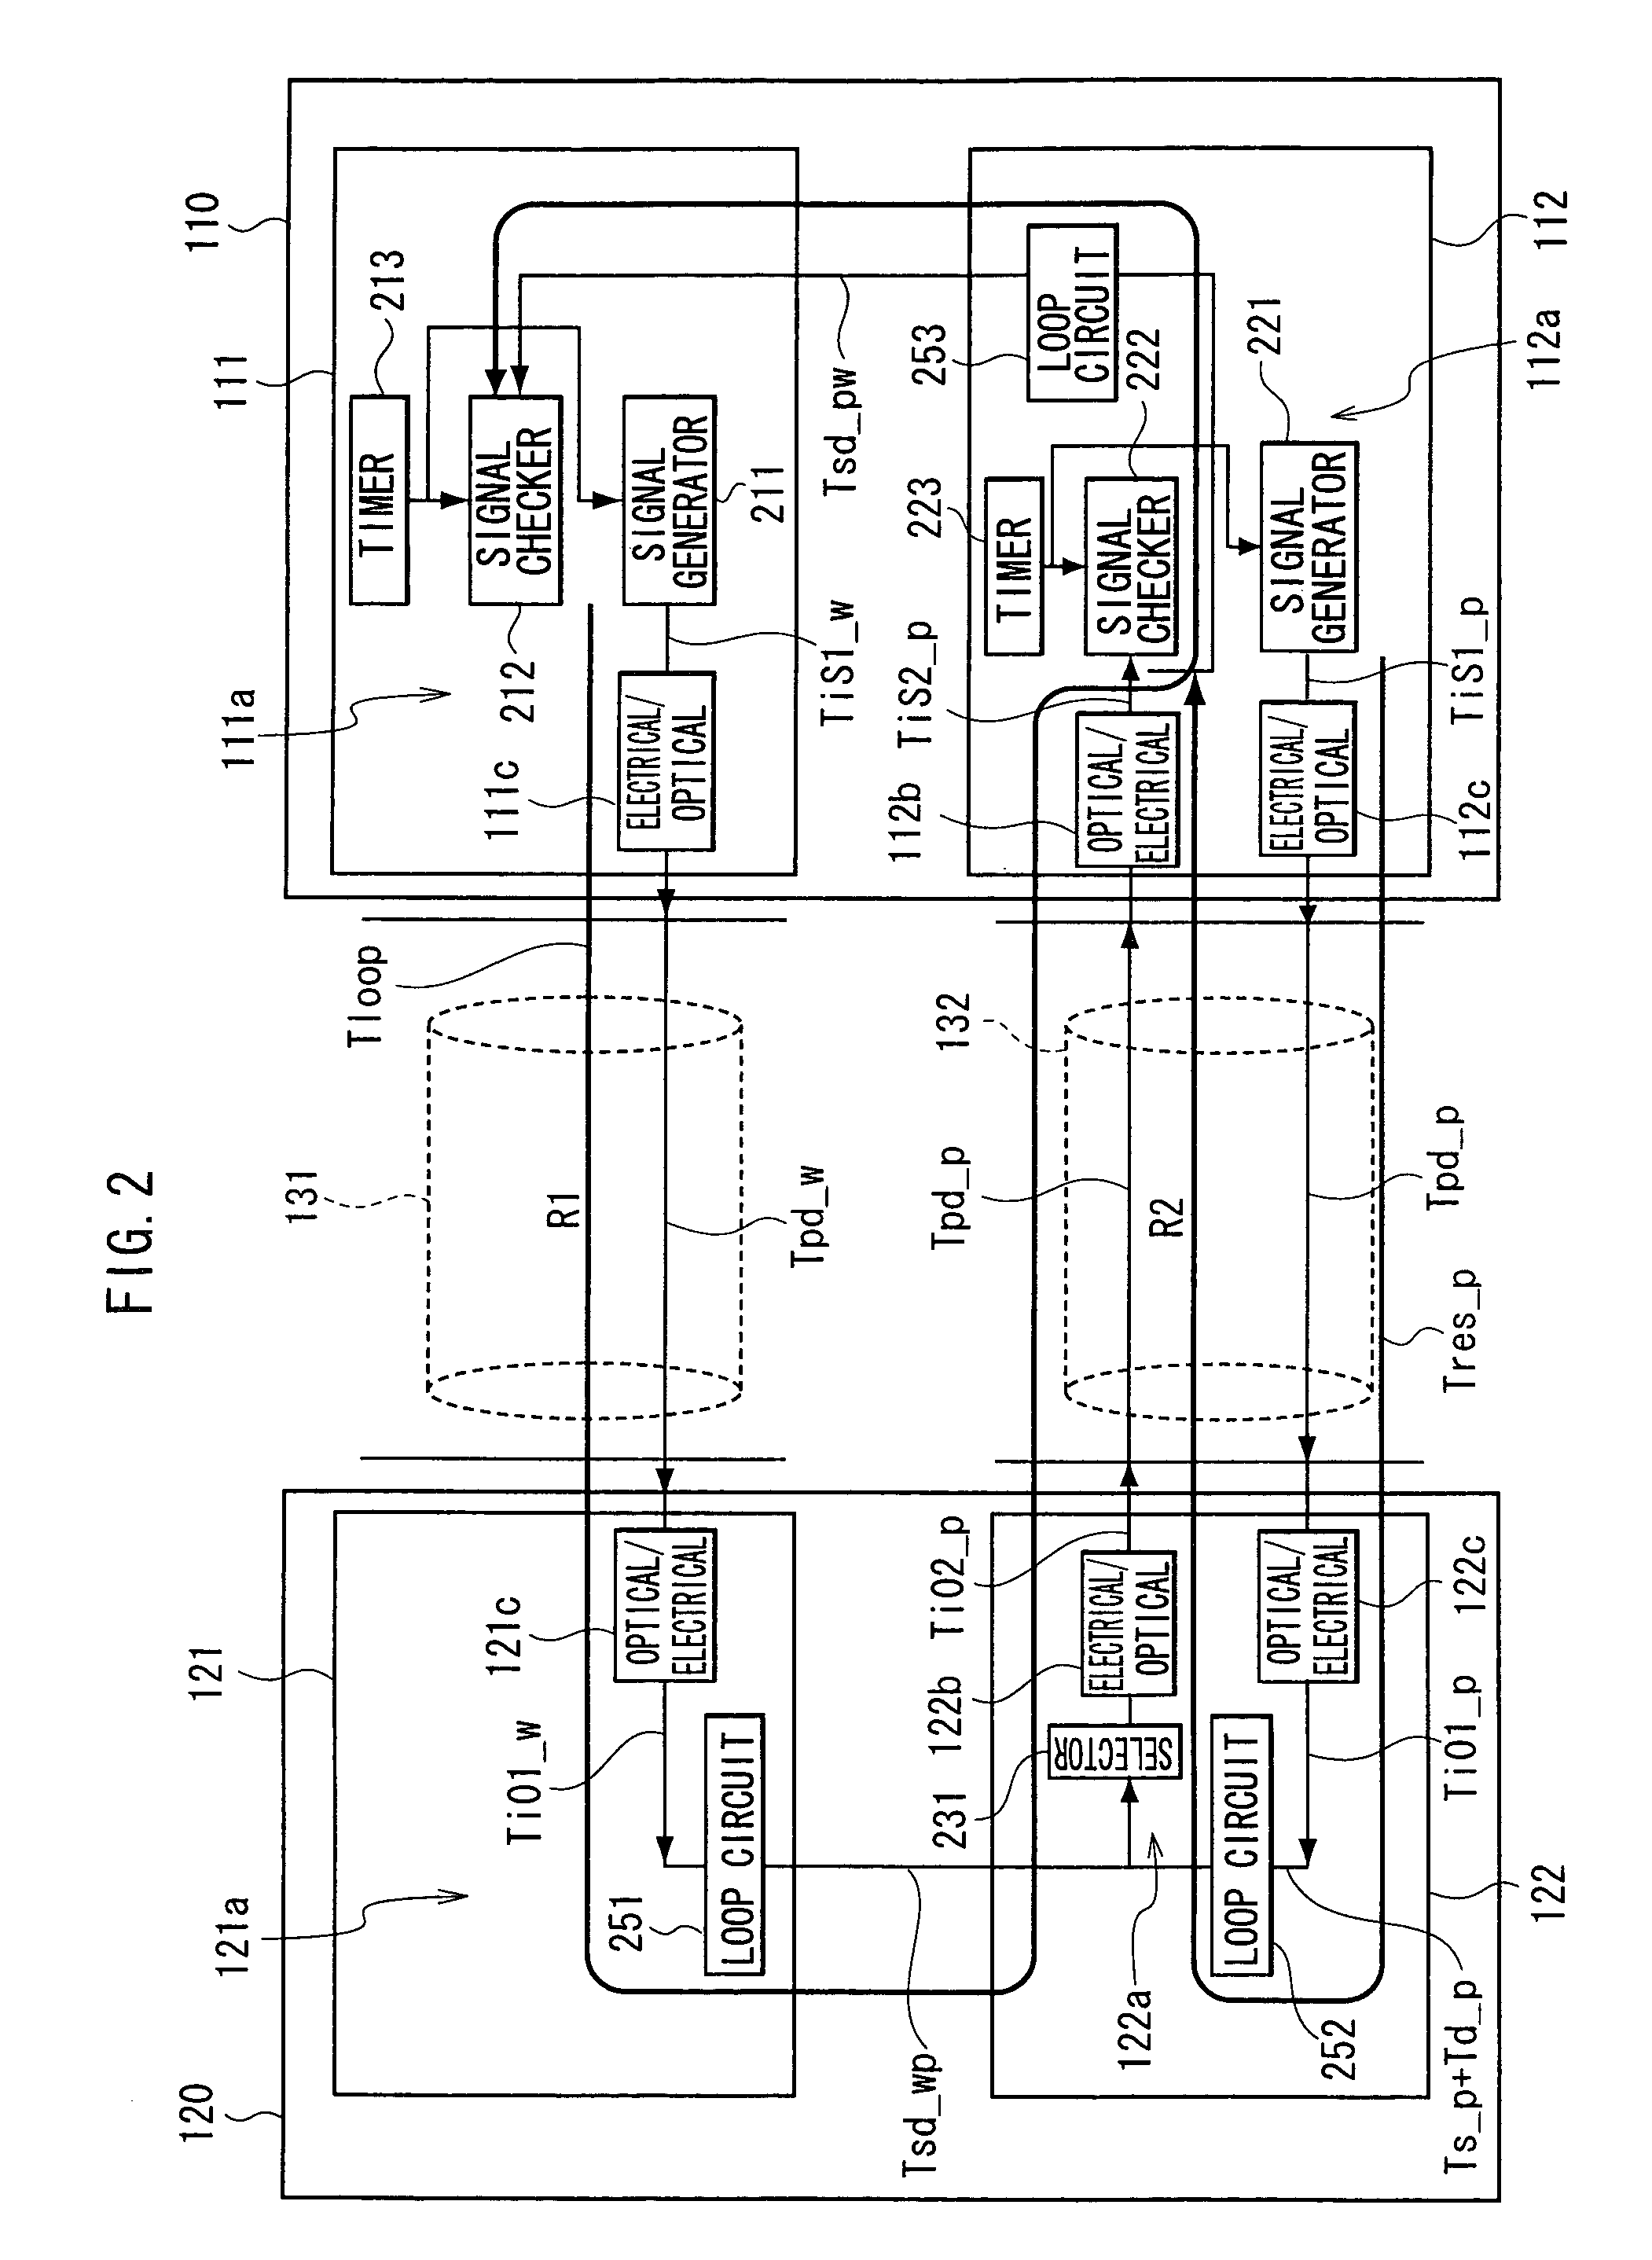 Optical access system and ranging method for optical access system